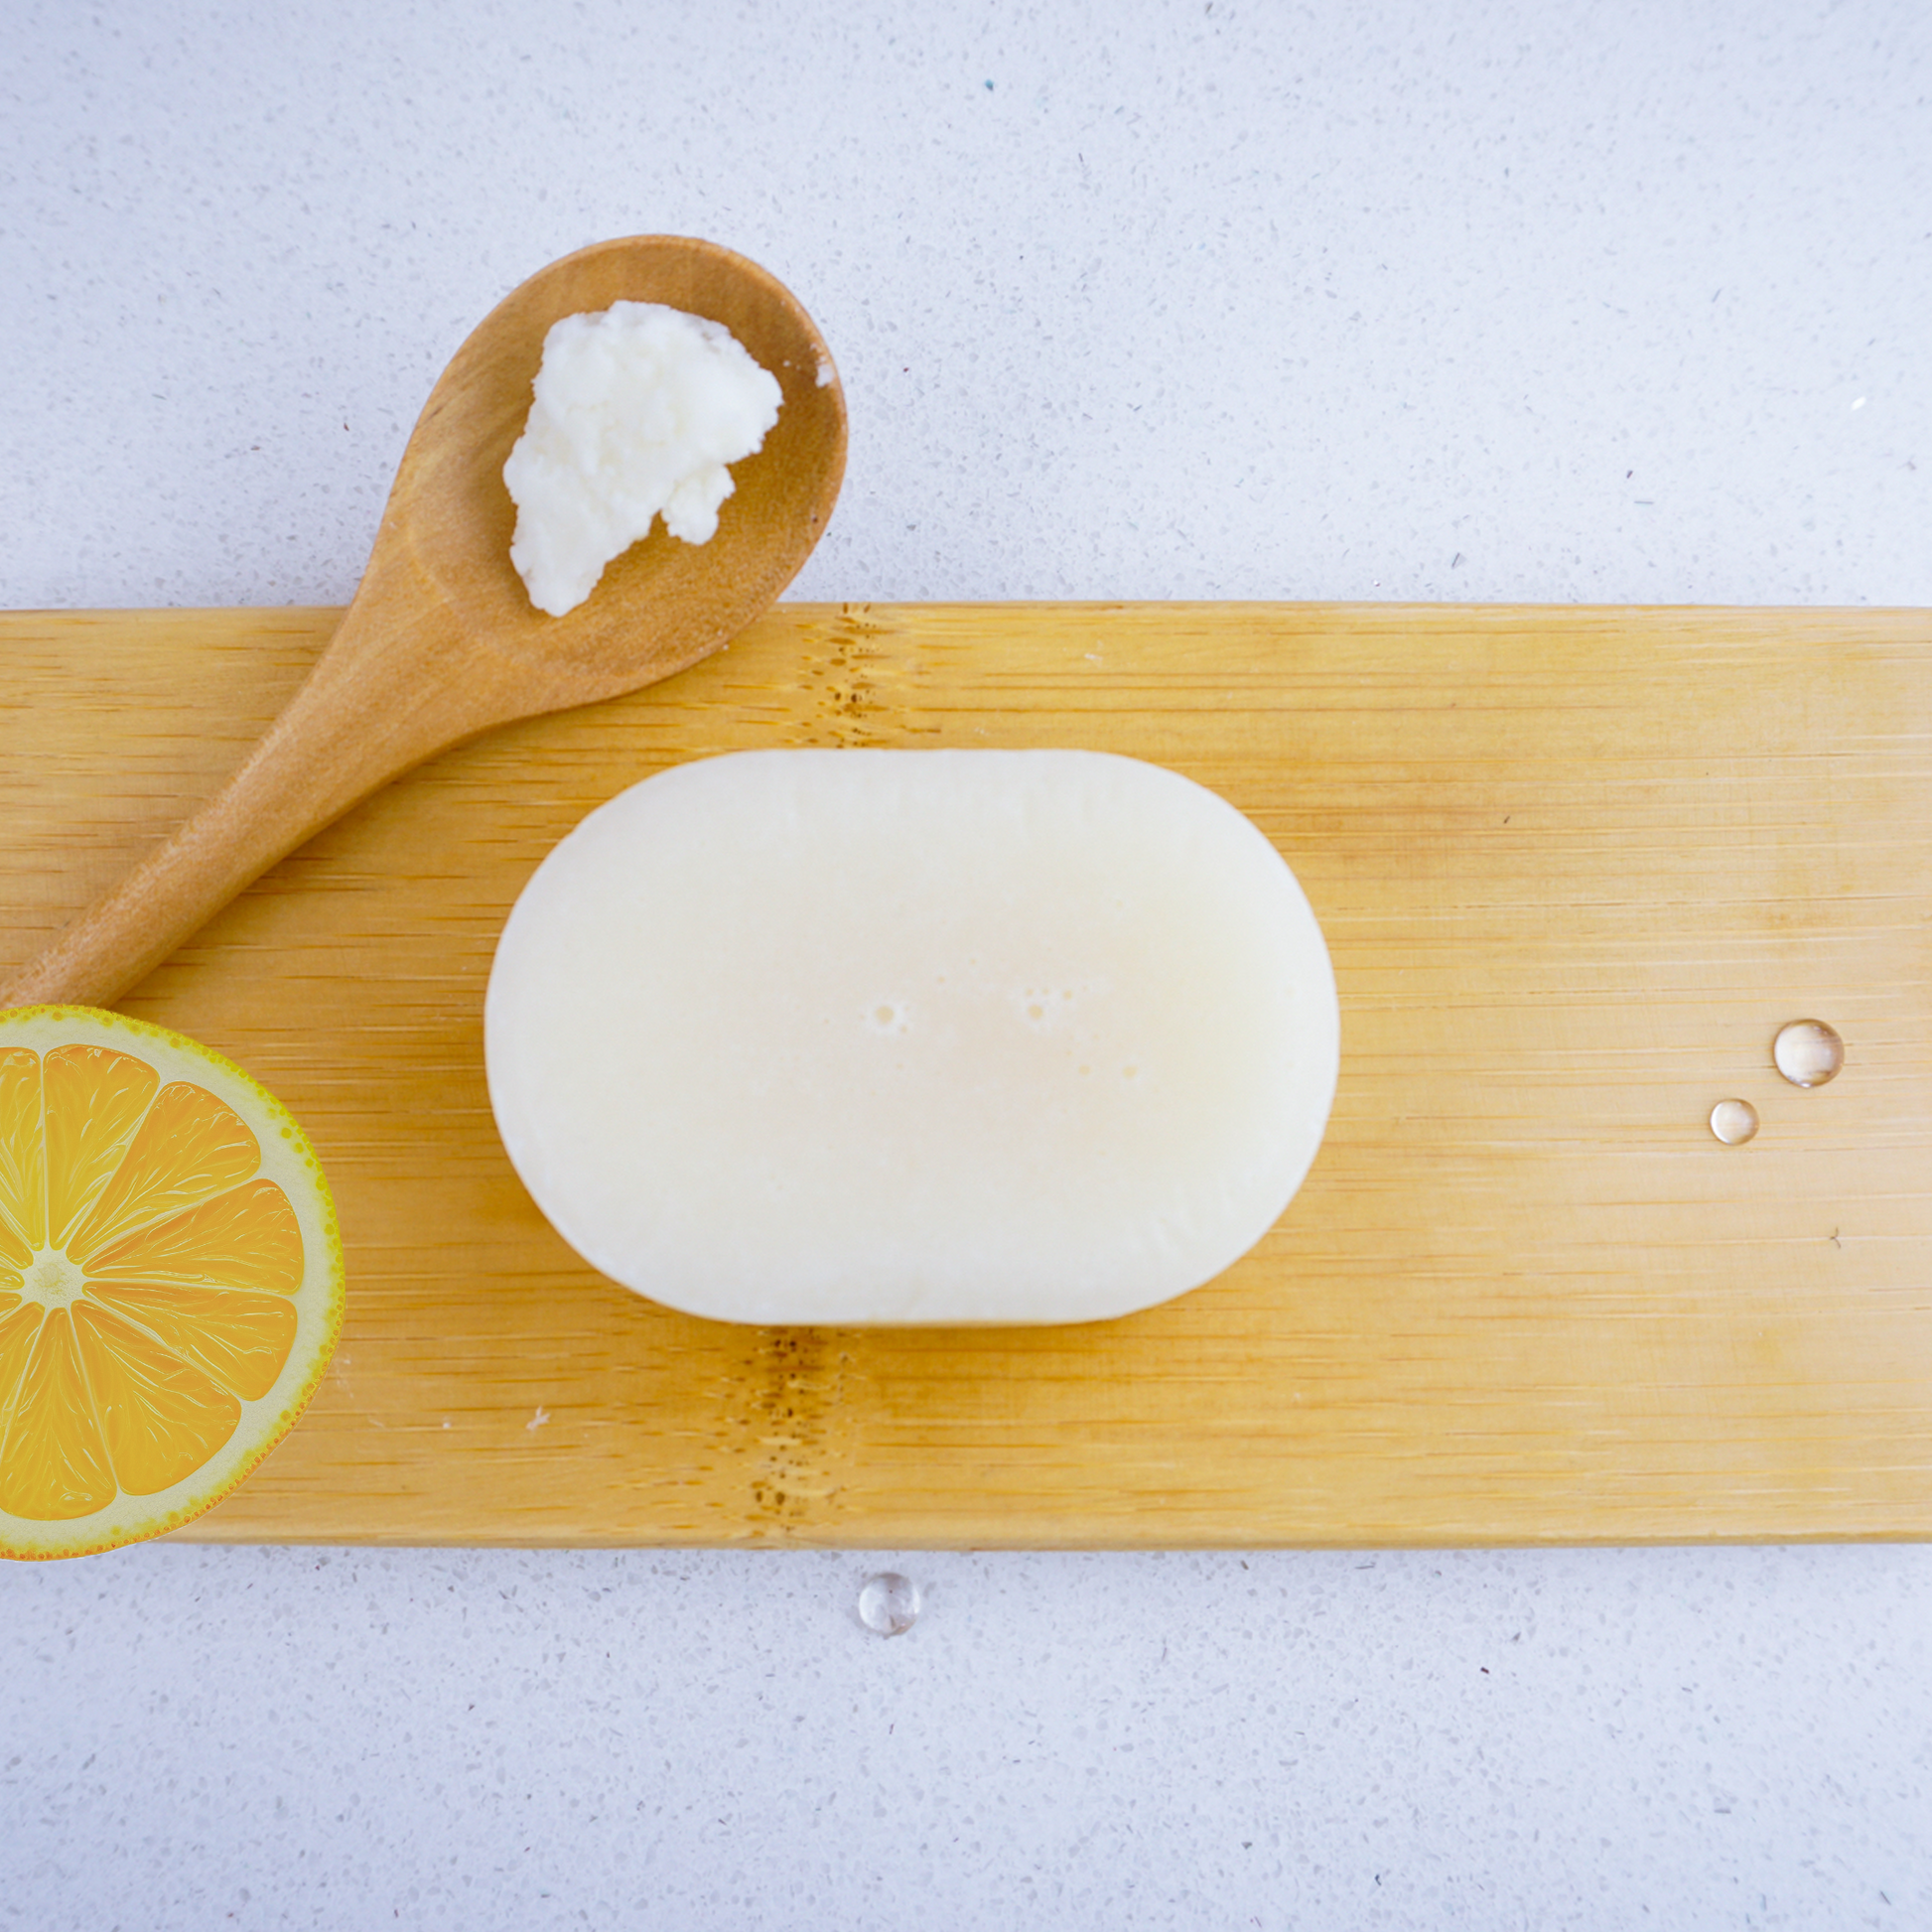 Washla lemon conditioner bar next to a wooden spoonful of shea butter